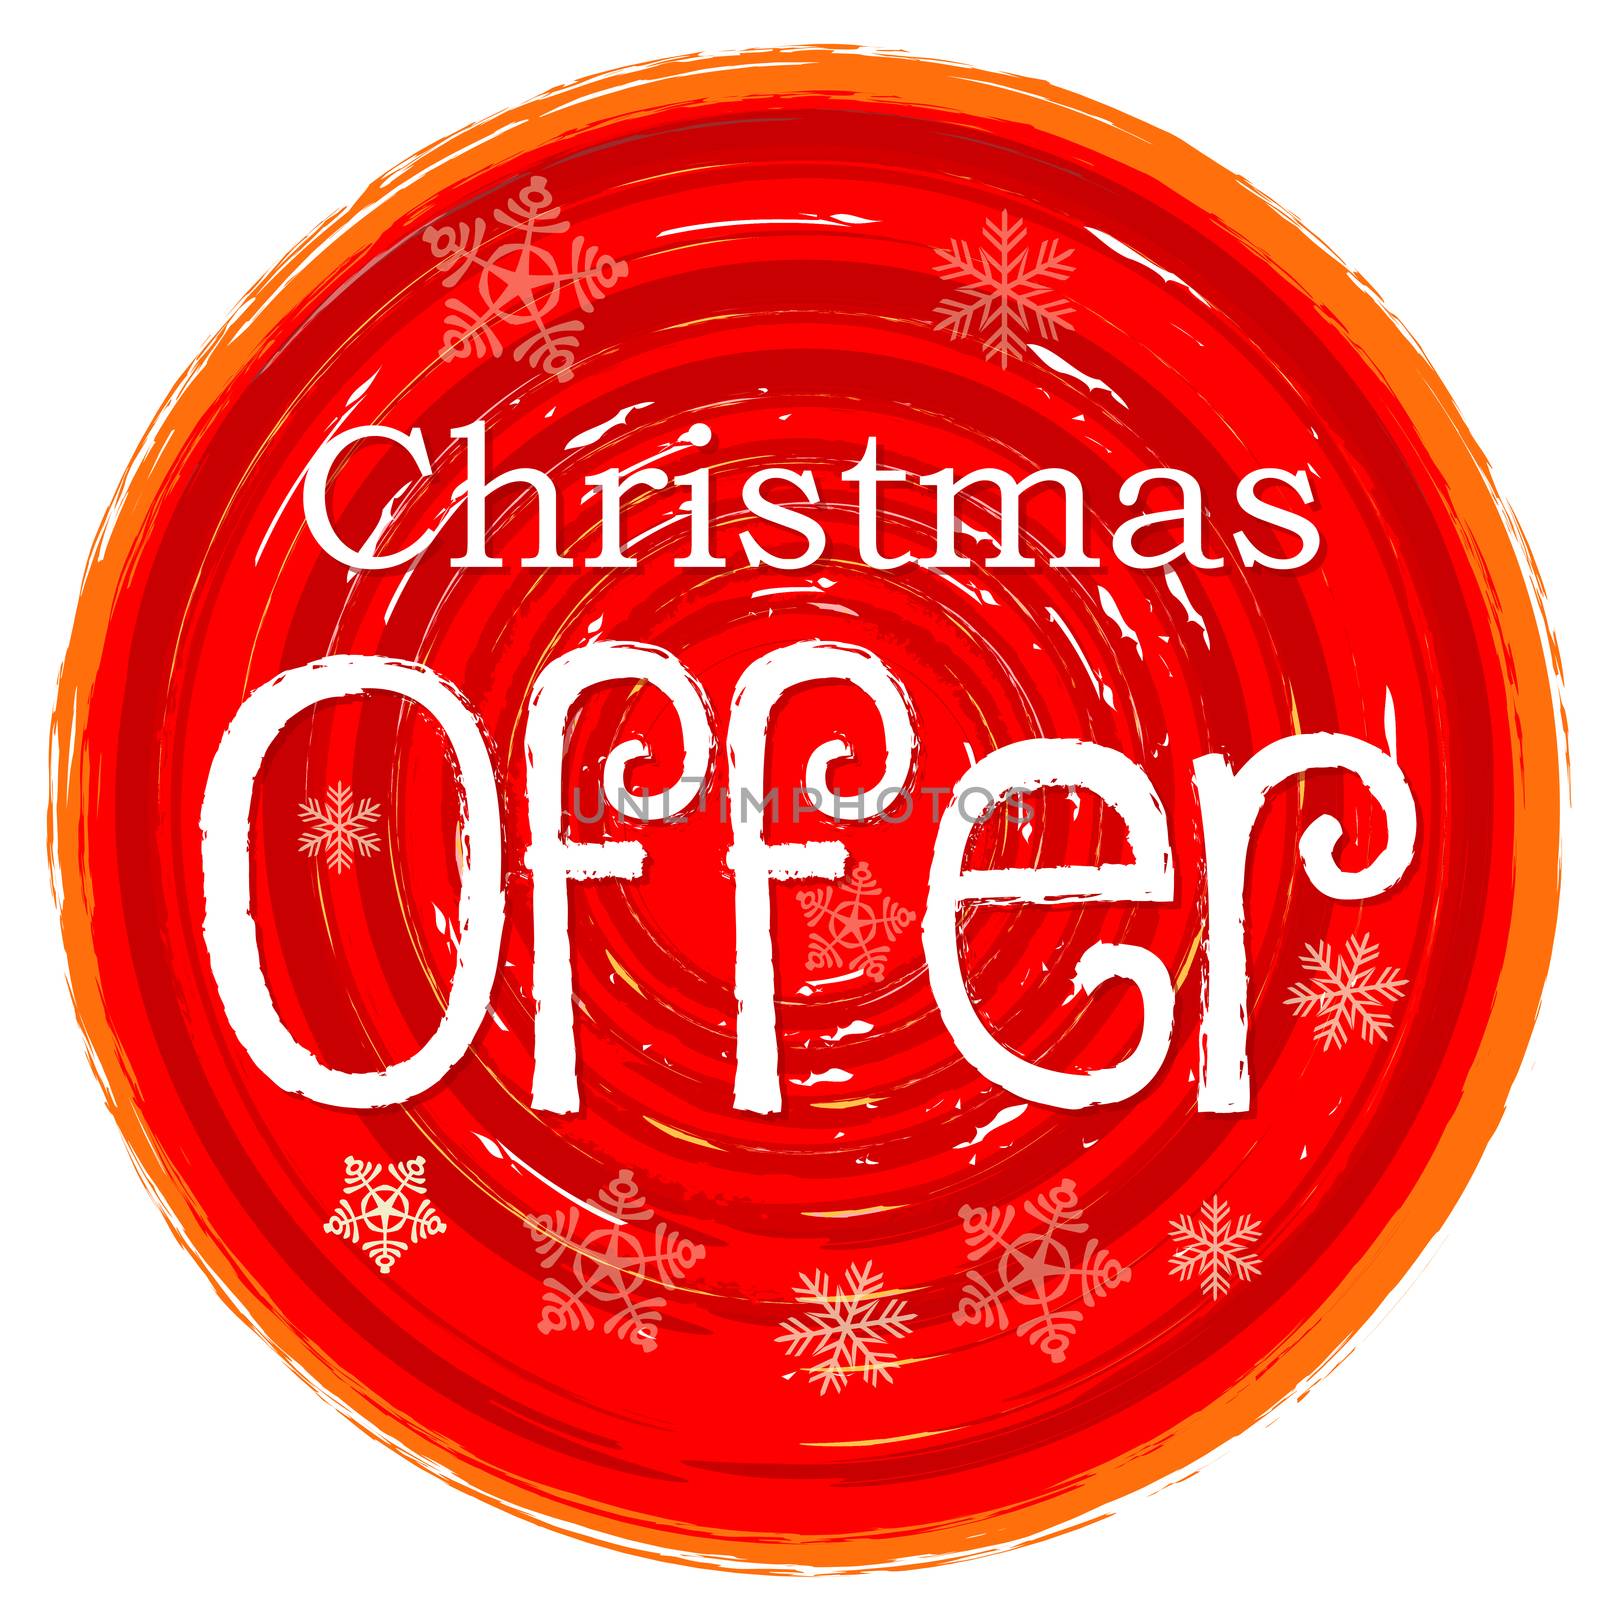 christmas offer - text and snowflakes in circular drawn red banner, business holiday concept